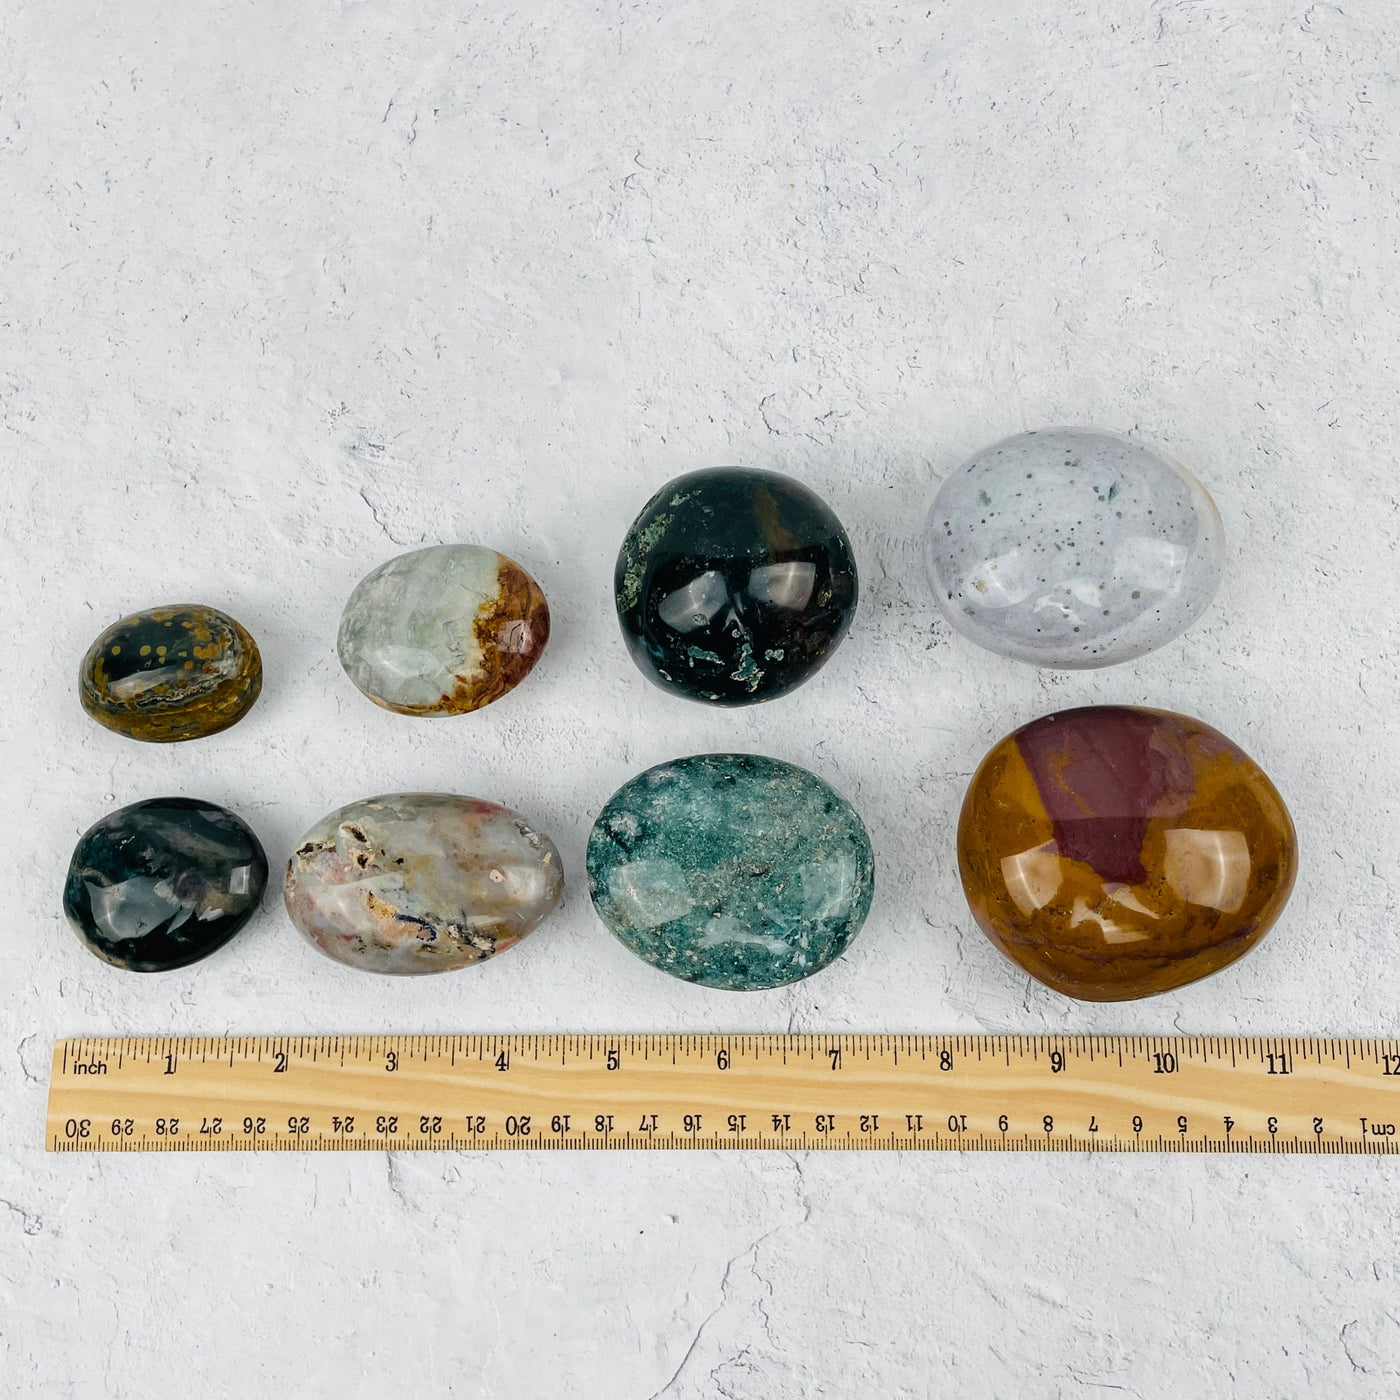 Ocean Jasper Palm Stones displayed next to a ruler for size reference 